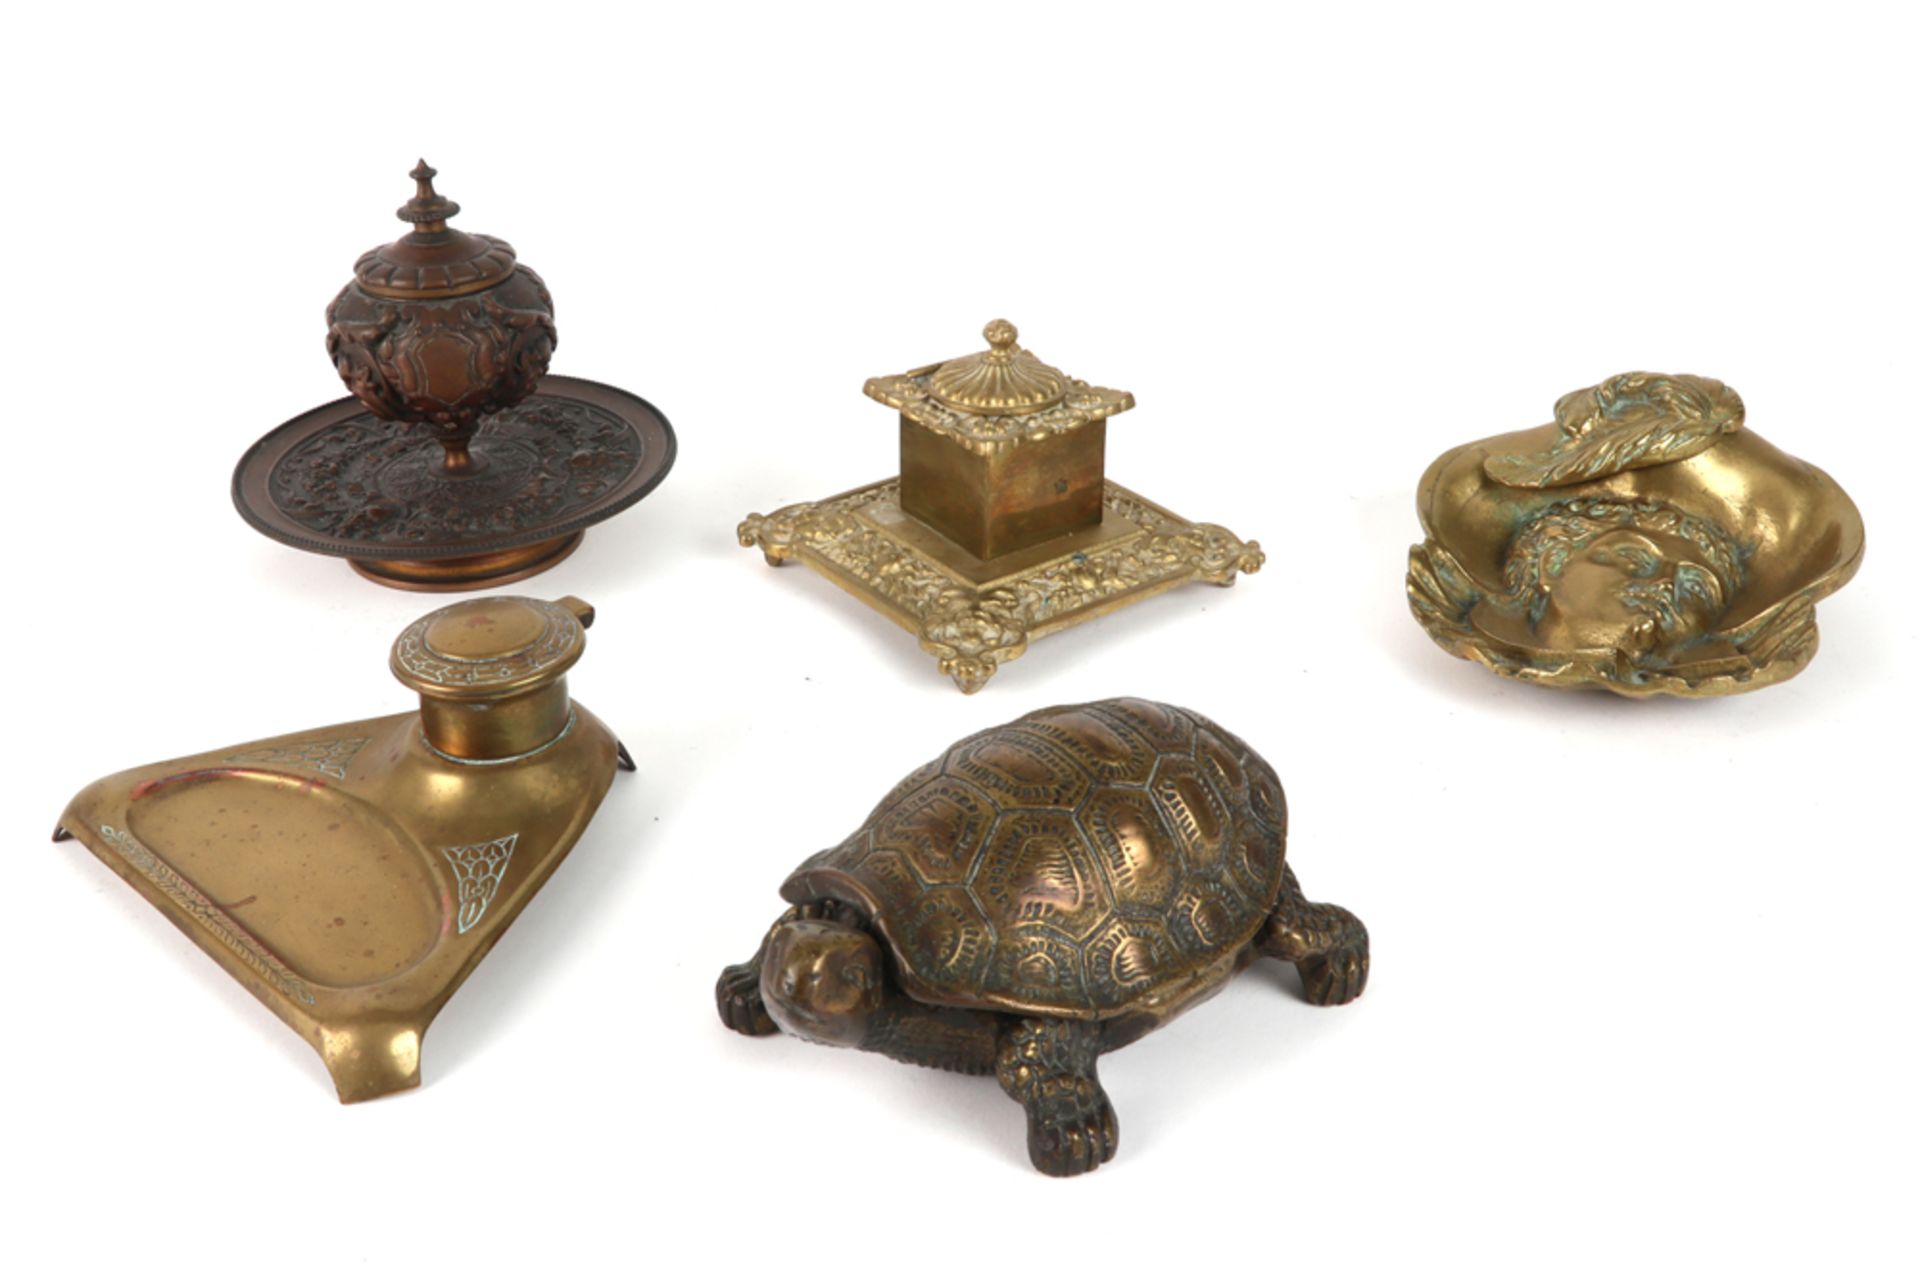 five antique and old bronze inkstands amongst which a tortoise